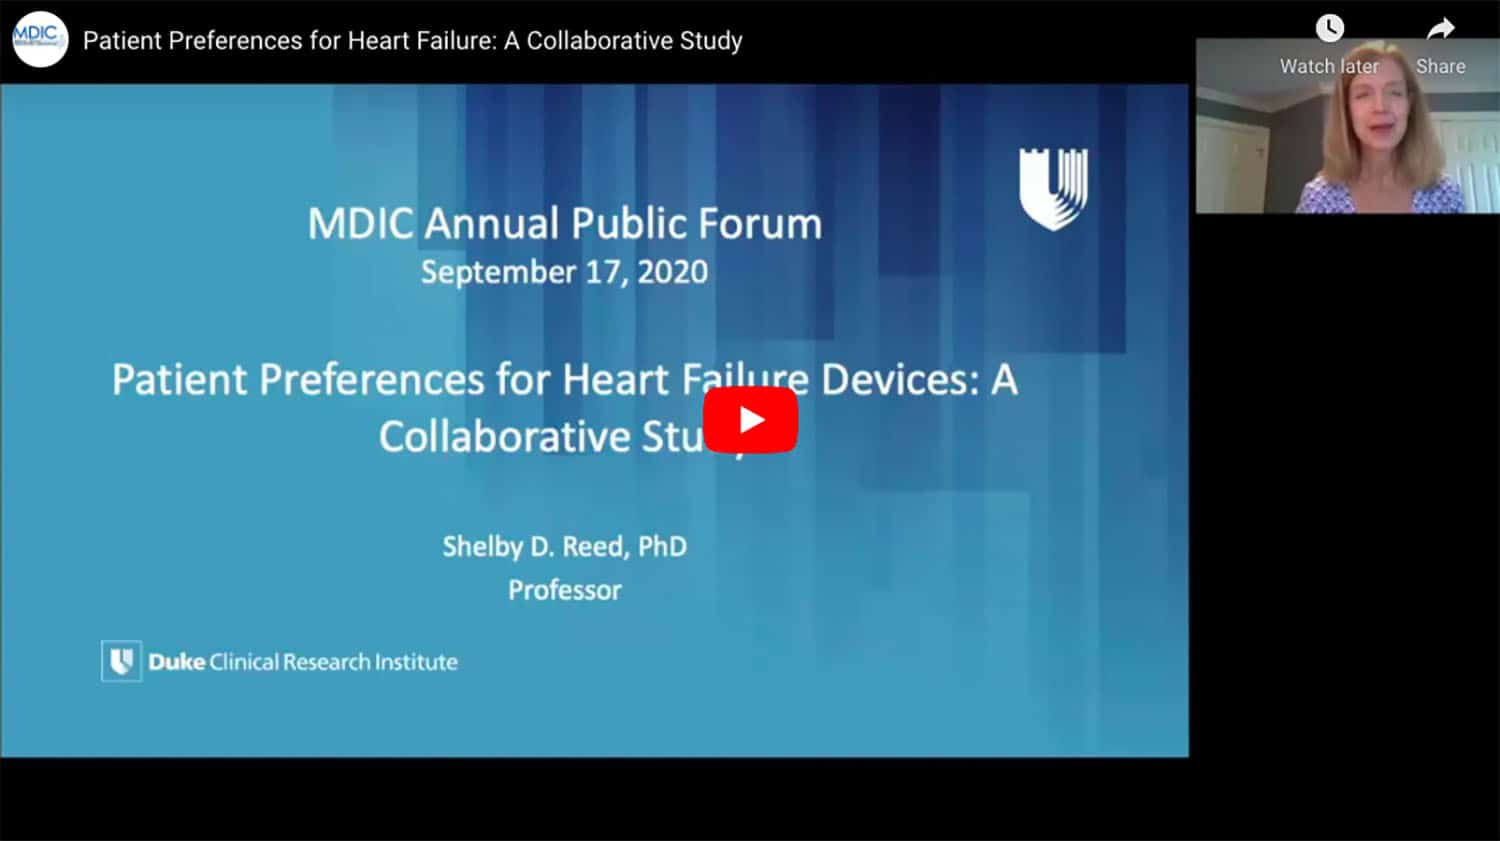 Video Release for Patient Preferences for Heart Failure: A Collaborative Study